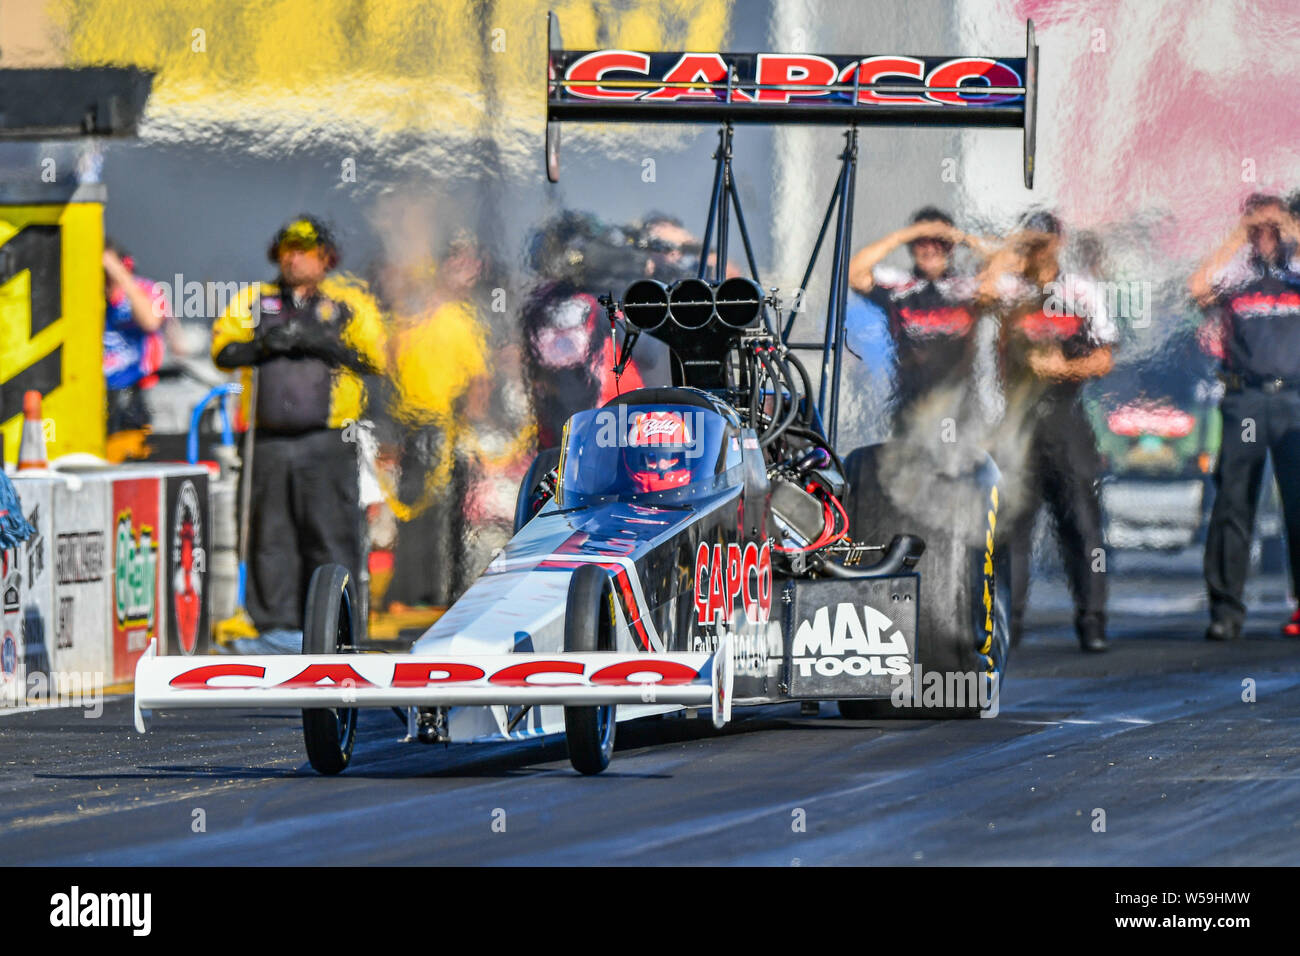 Sonoma, California, USA. 26th July, 2019. Bill Torrence launches his top fuel dragster during the NHRA Sonoma Nationals at Sonoma Raceway in Sonoma, California. Chris Brown/CSM/Alamy Live News Stock Photo